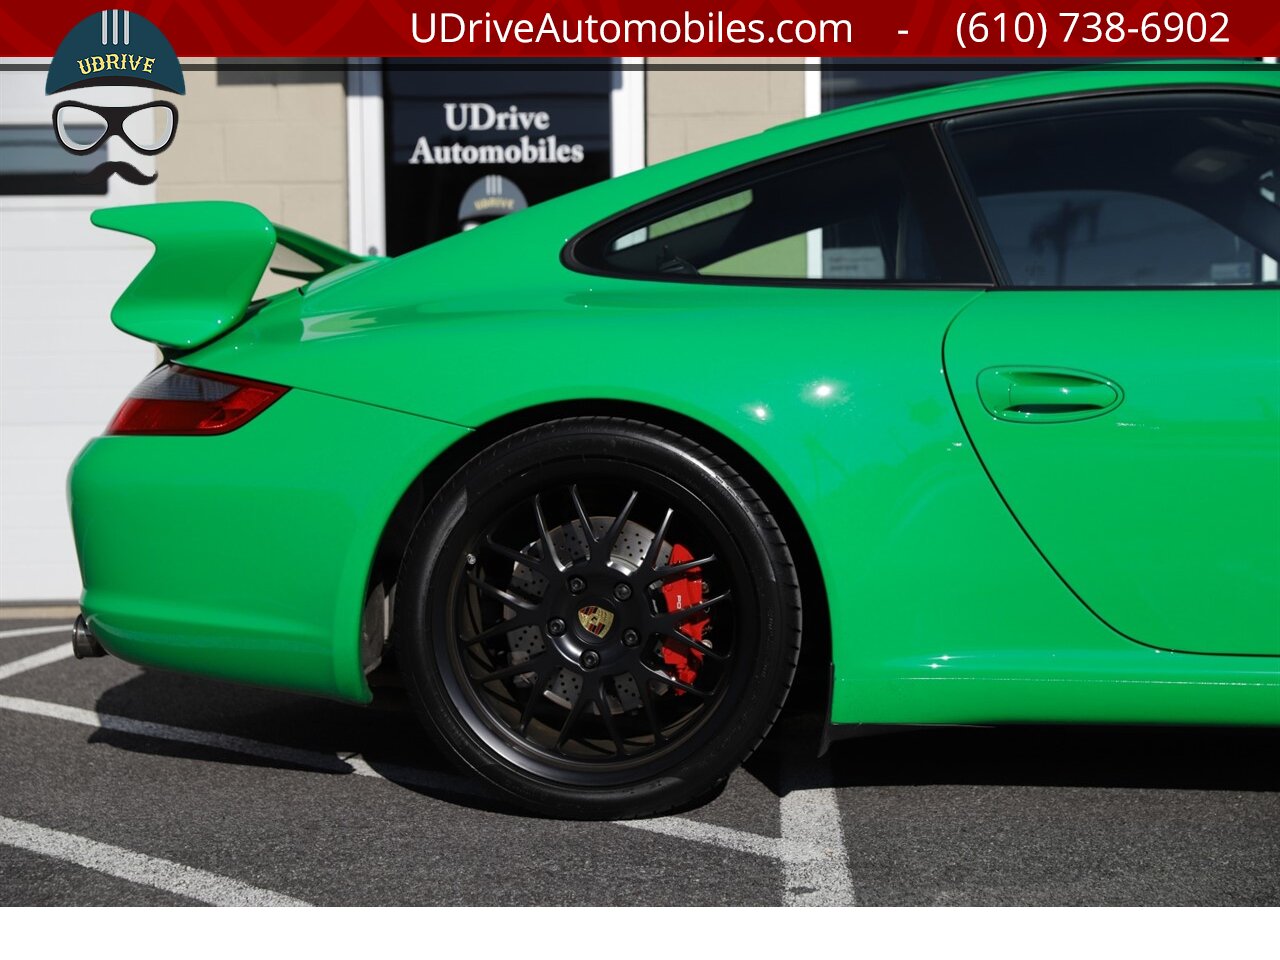 2008 Porsche 911 S 997 6Sp PTS RS Green AeroKit 1of a Kind  $118k MSRP Champion F77 Pkg RG5 Whls - Photo 19 - West Chester, PA 19382